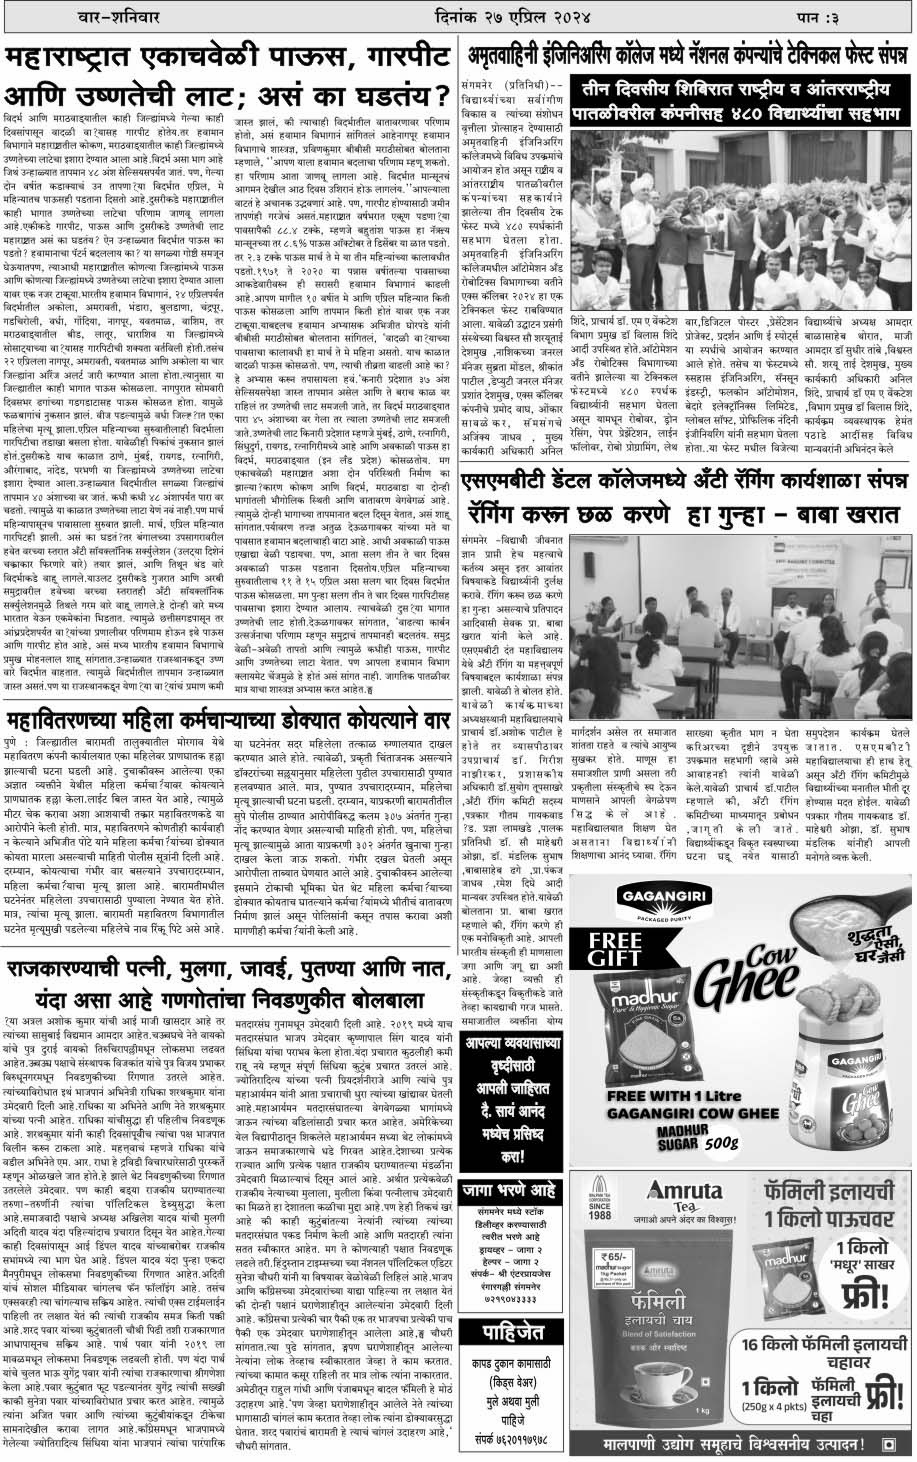 Front page of daily newspaper ANAND